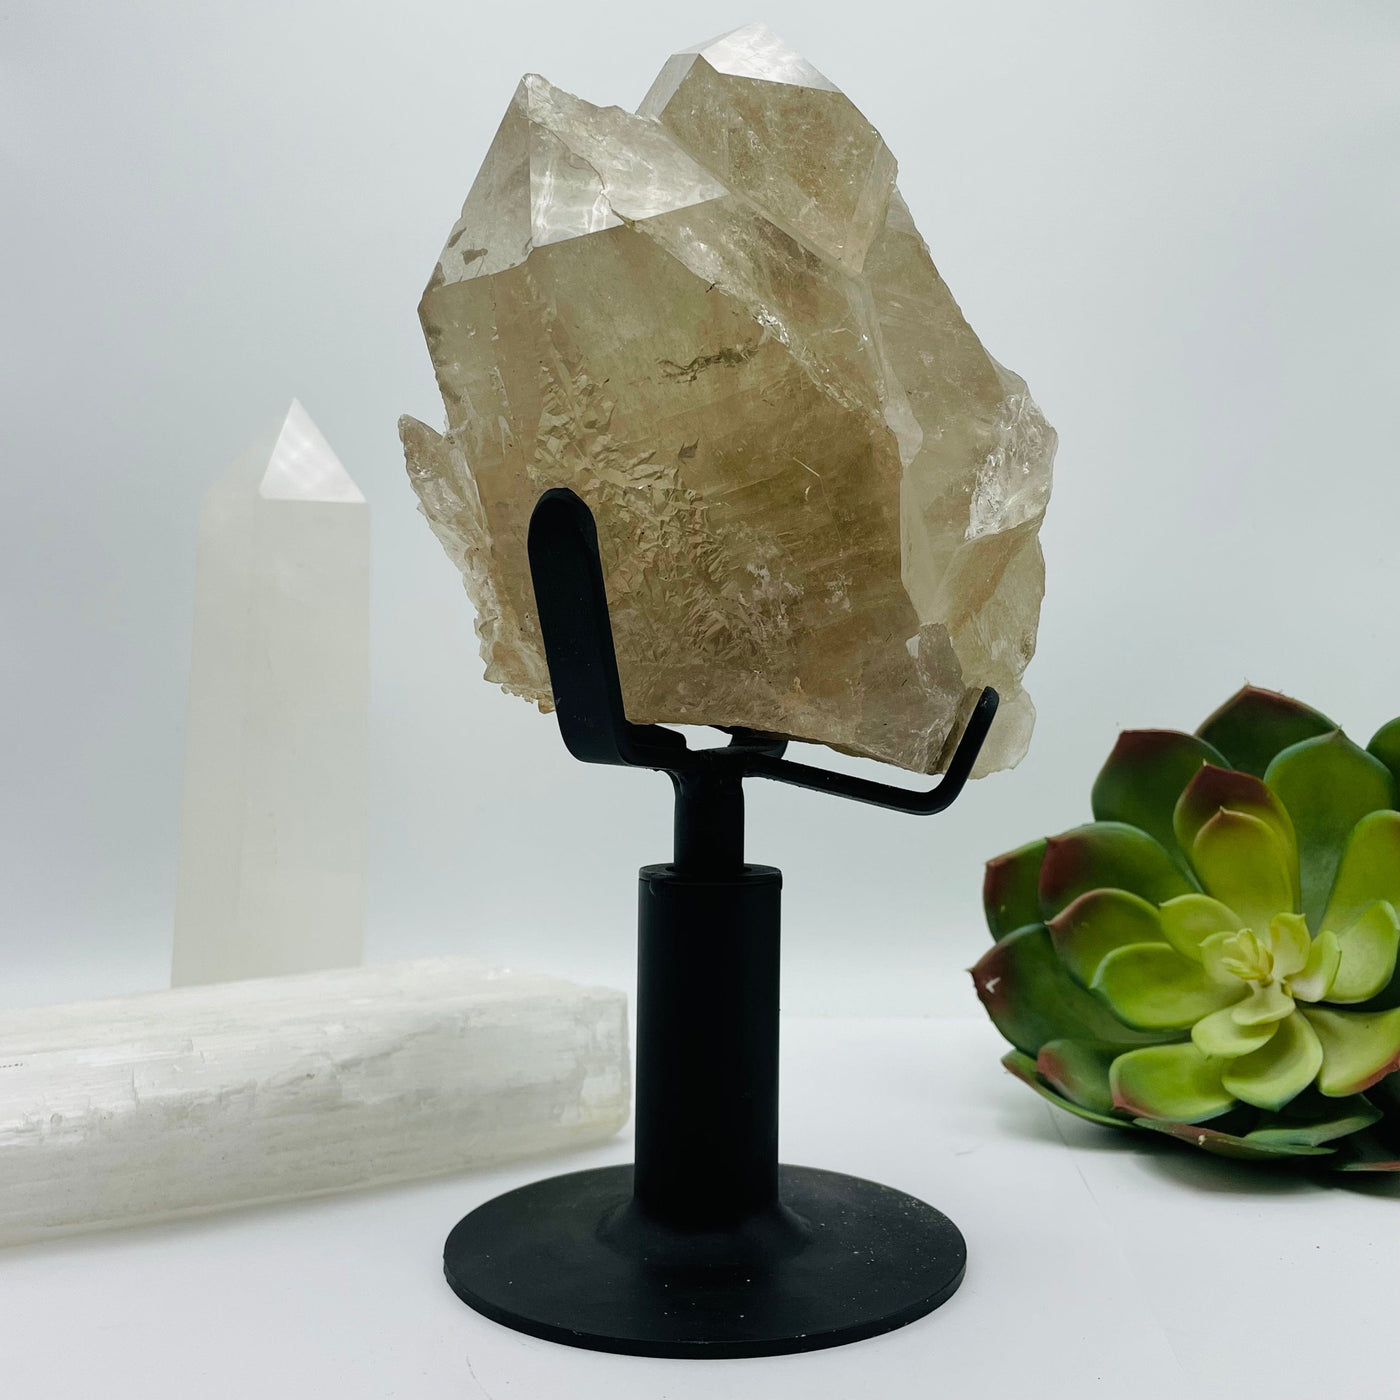 Rutilated Crystal Quartz Cluster on Metal Stand with decorations in the background